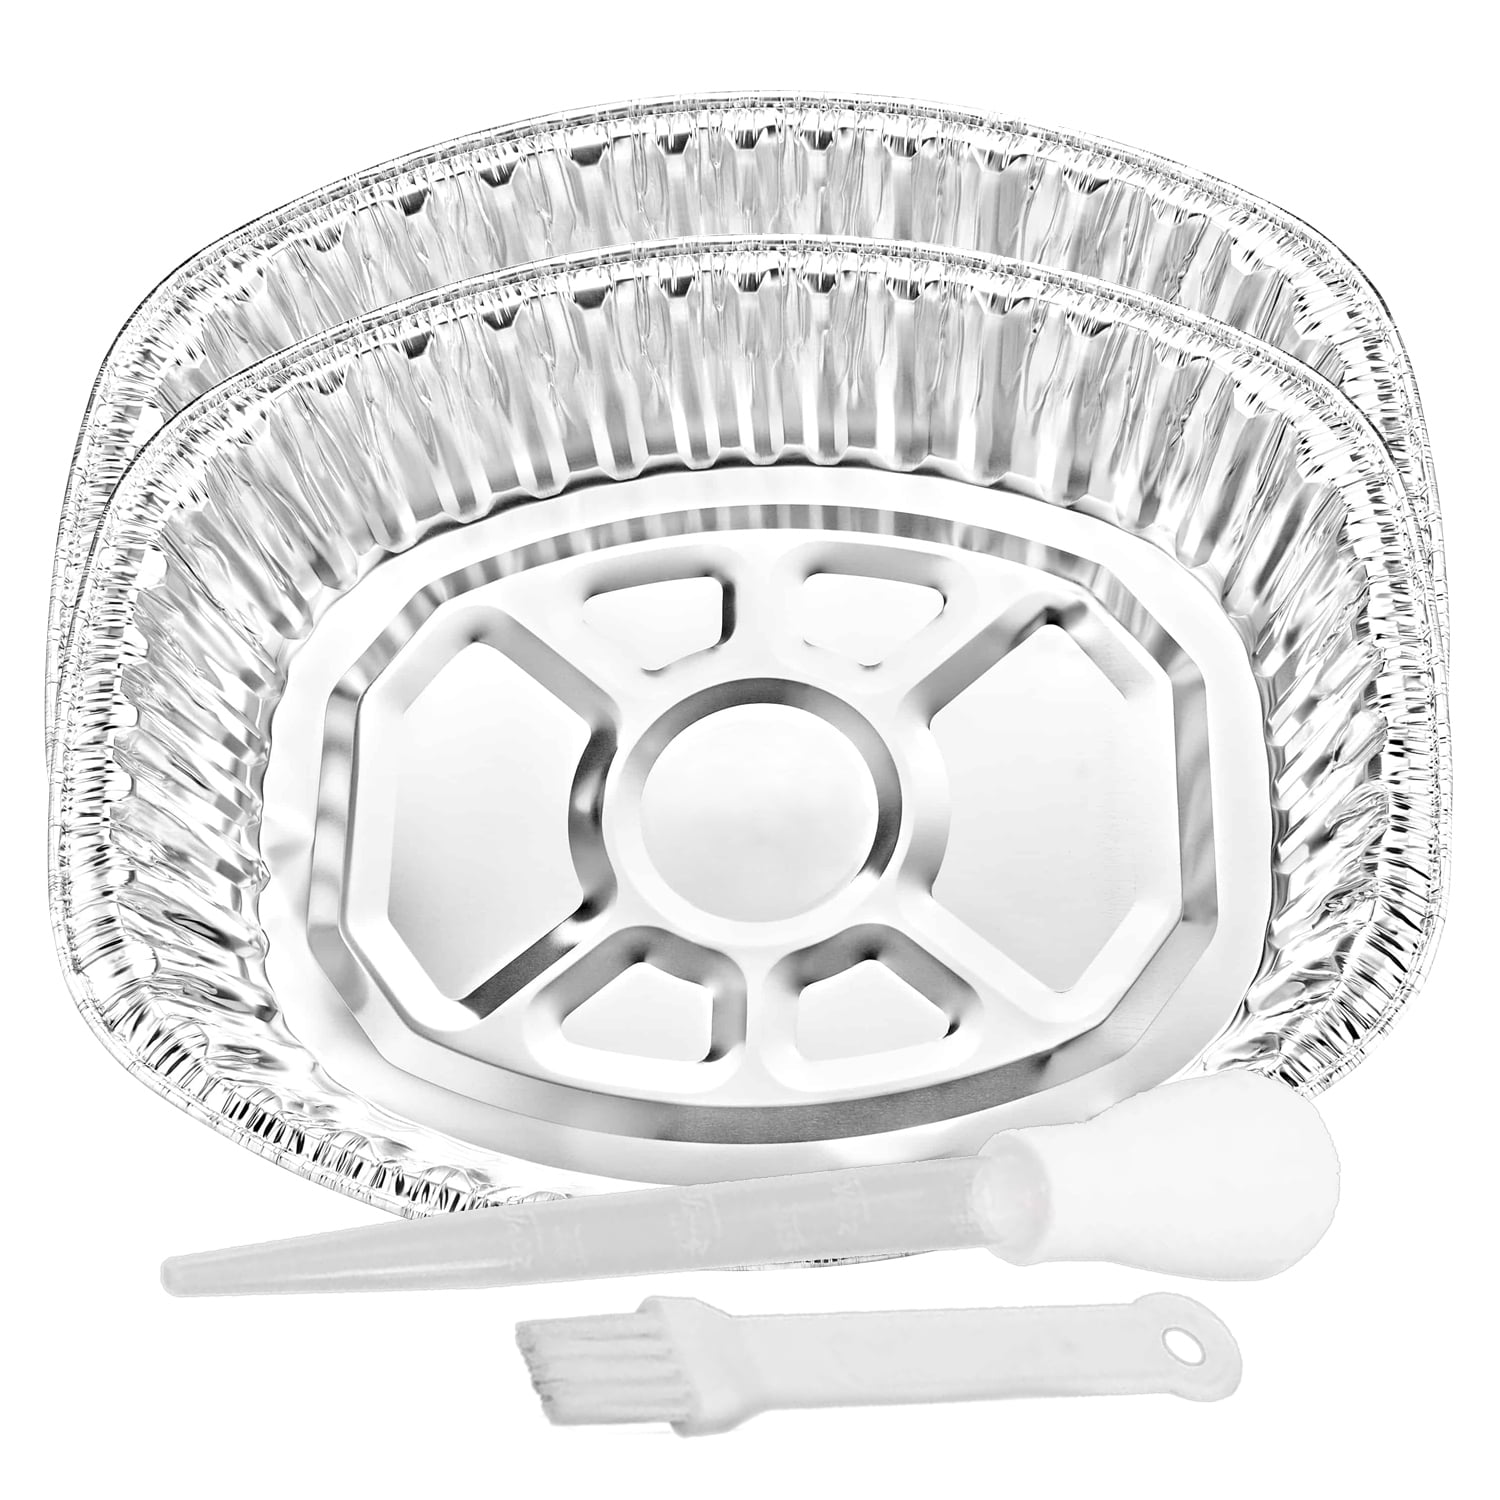 Large Oval Foil Turkey Roasting Tray Aluminium Disposable Catering